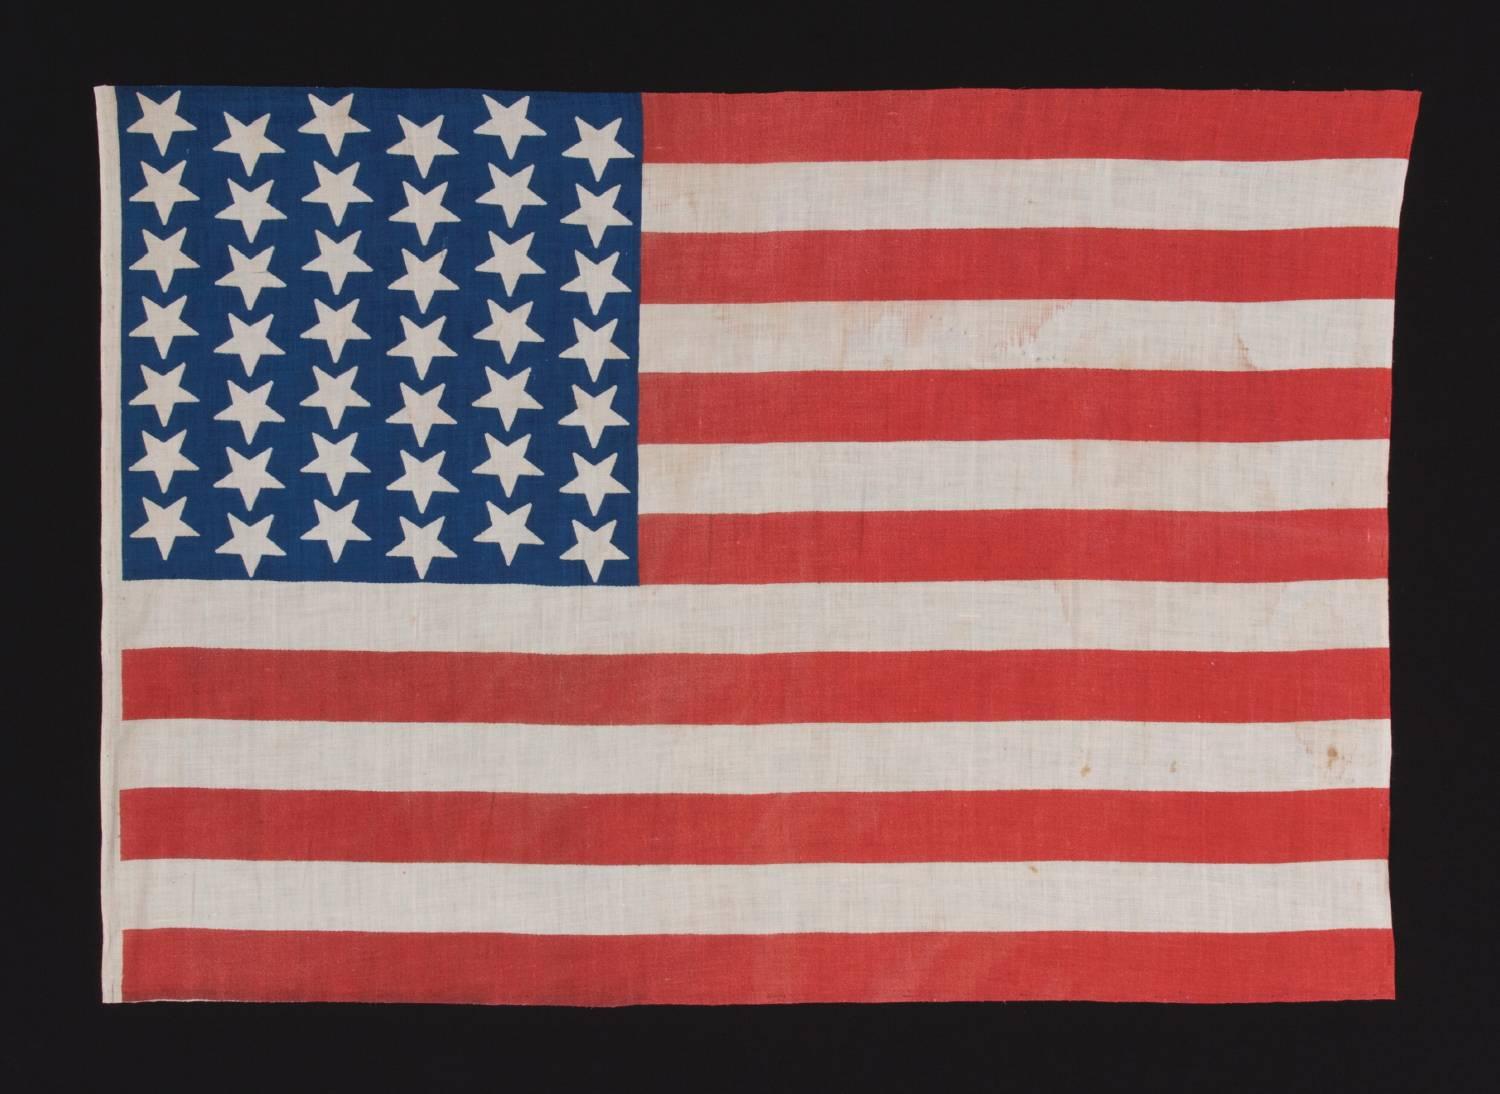 42 Upside down stars in a wave configuration on a brilliant blue canton, 1889-1890, Washington statehood, an unofficial star count:

 42 star American national parade flag, printed on plain weave cotton. The stars, that are especially large in